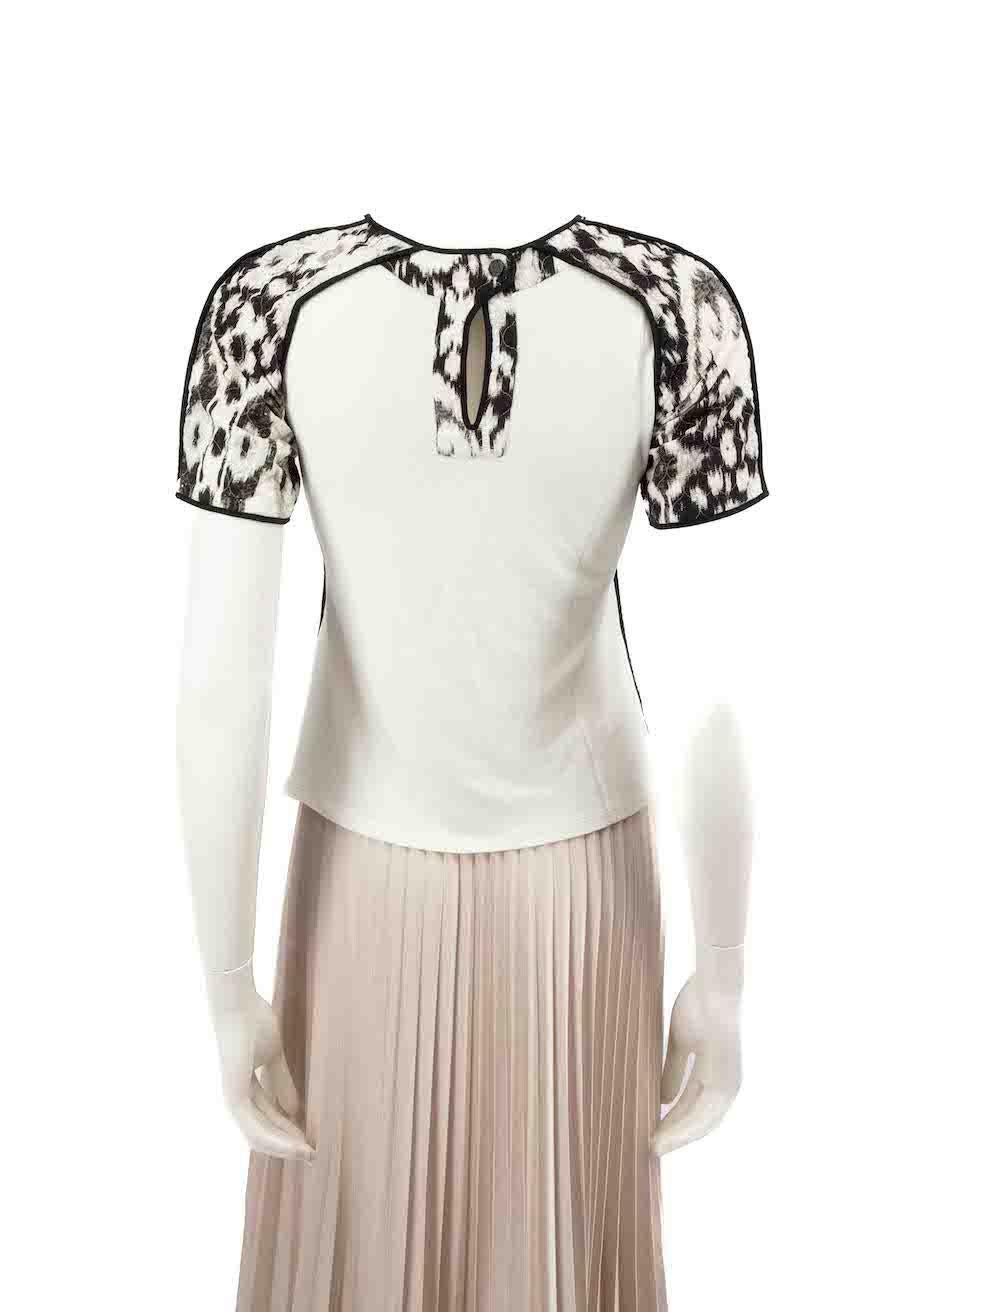 Roberto Cavalli Black & White Silk Quilted Top Size S In Excellent Condition For Sale In London, GB